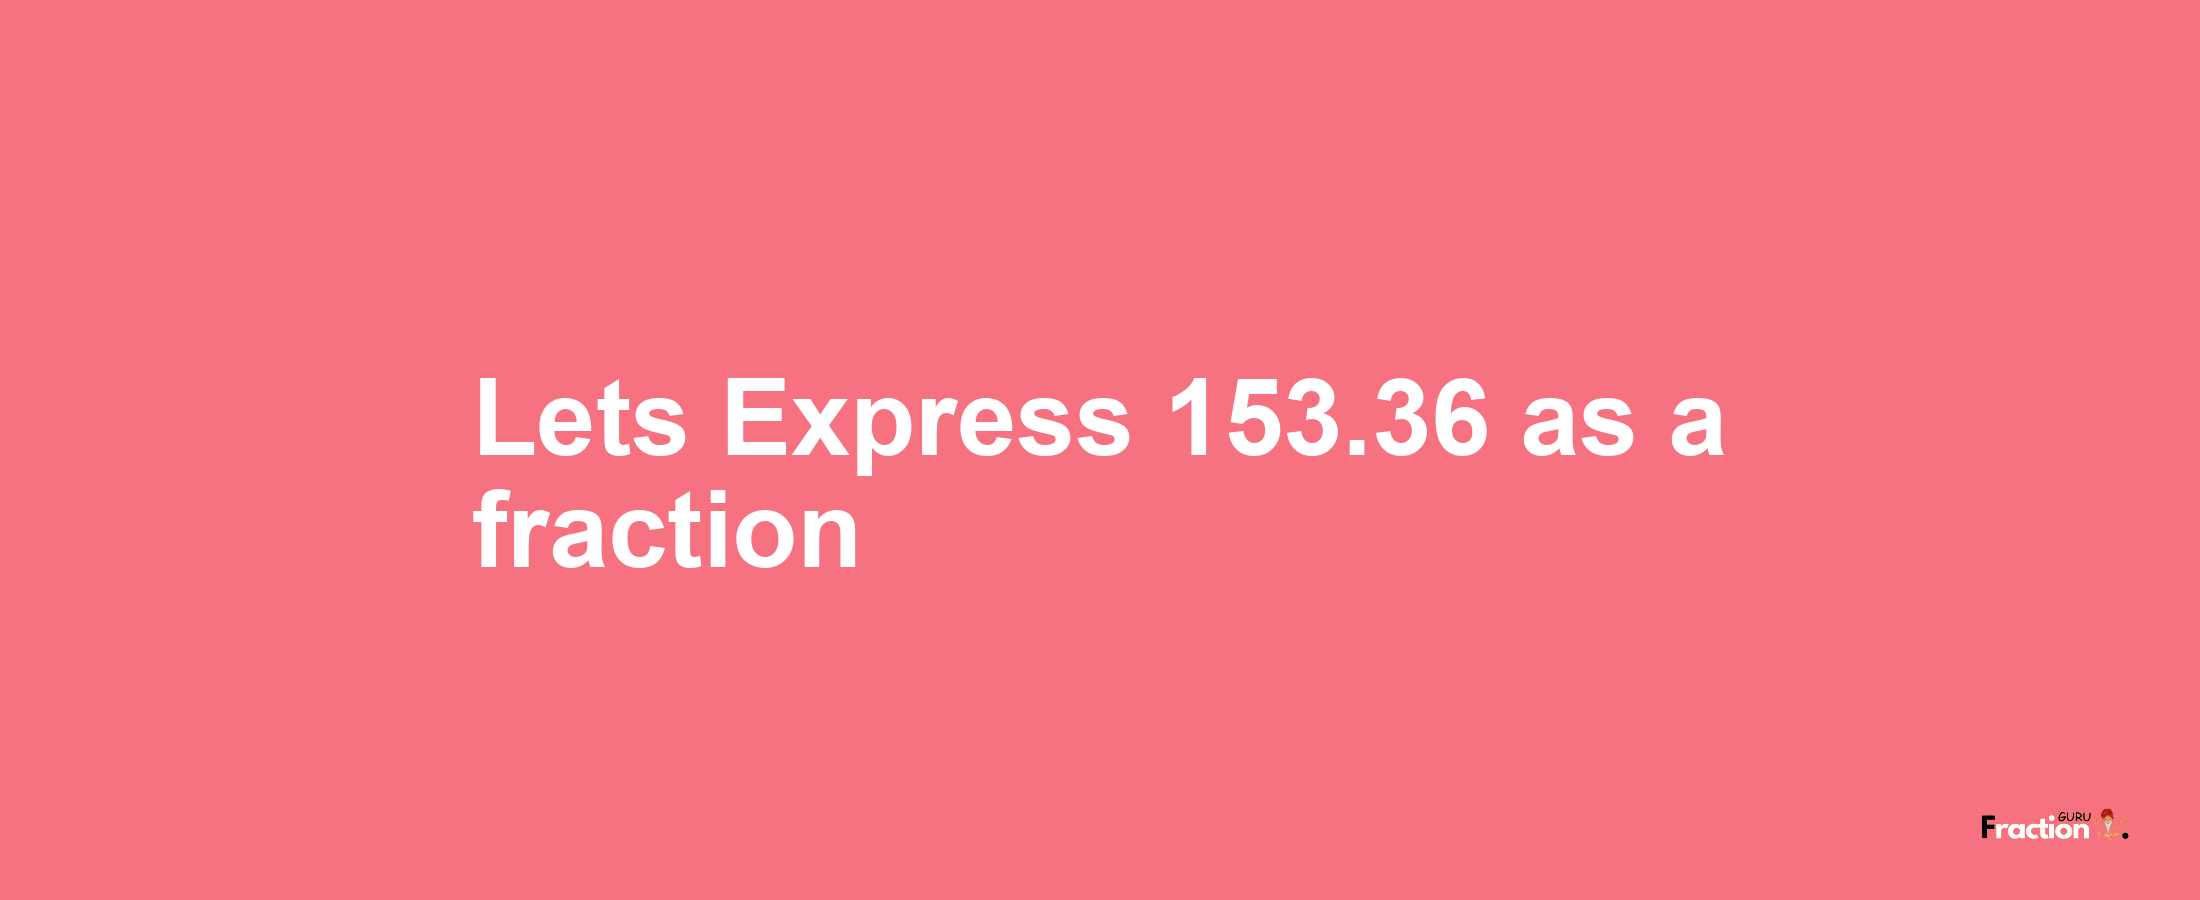 Lets Express 153.36 as afraction